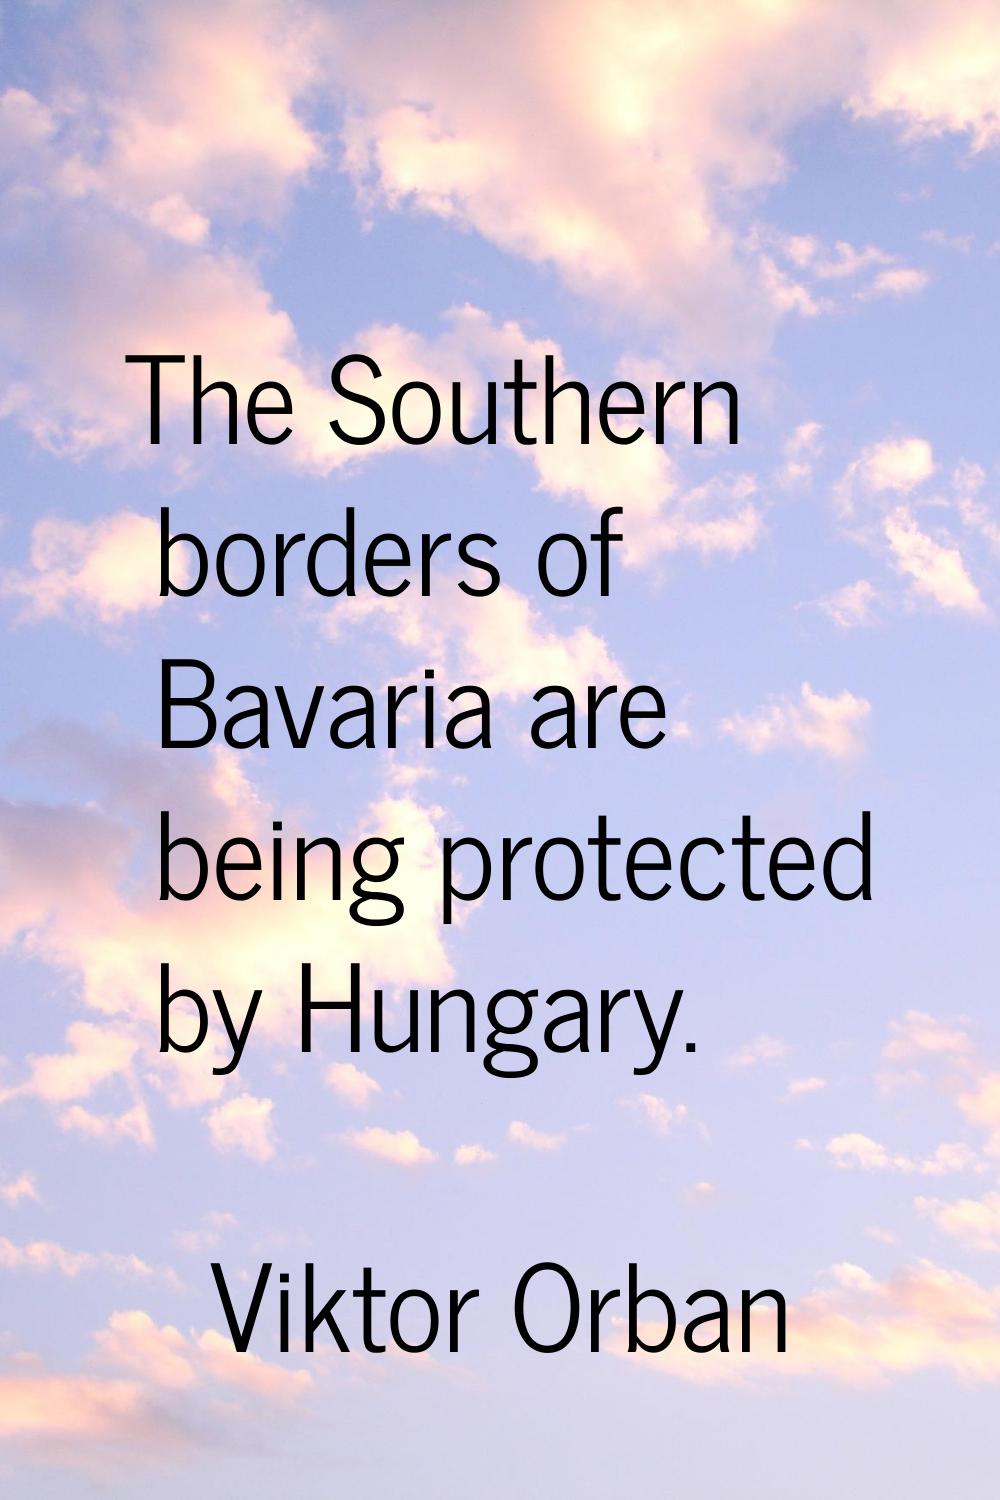 The Southern borders of Bavaria are being protected by Hungary.